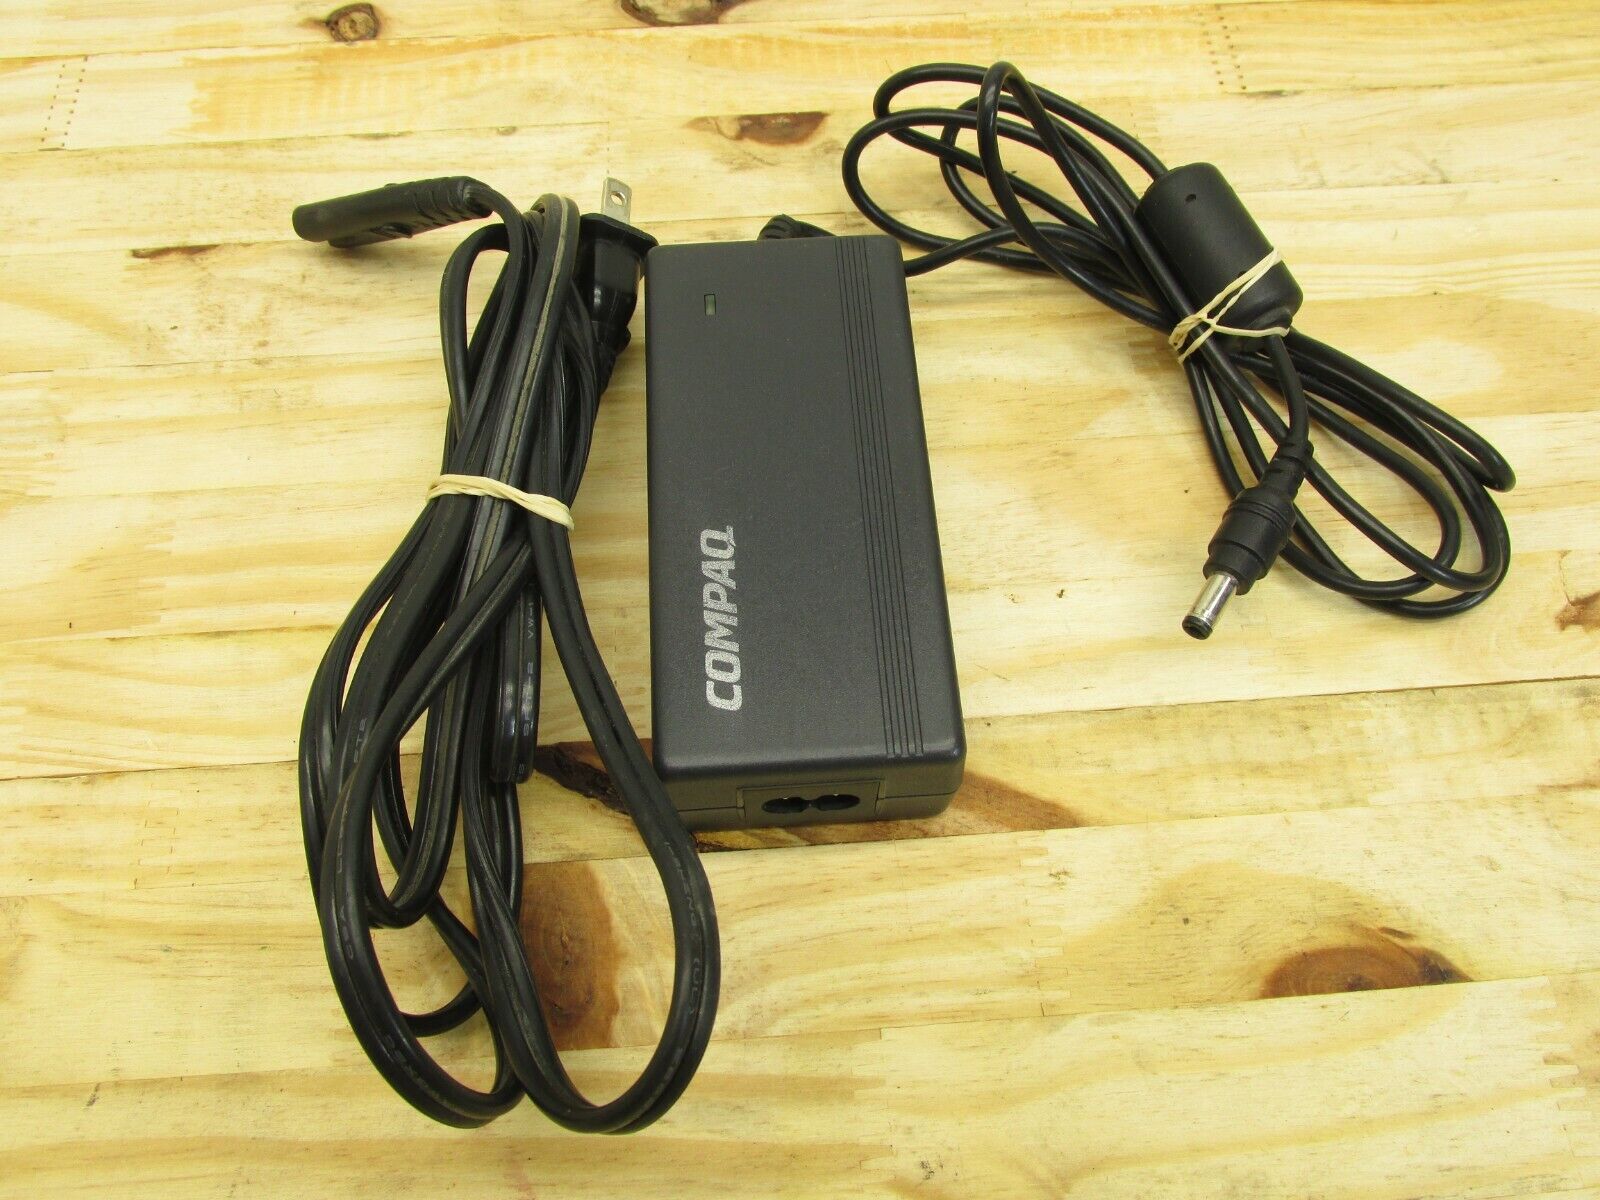 Genuine Compaq Laptop Charger AC Adapter Power Supply LE-9702A 19V 3.16A 60W